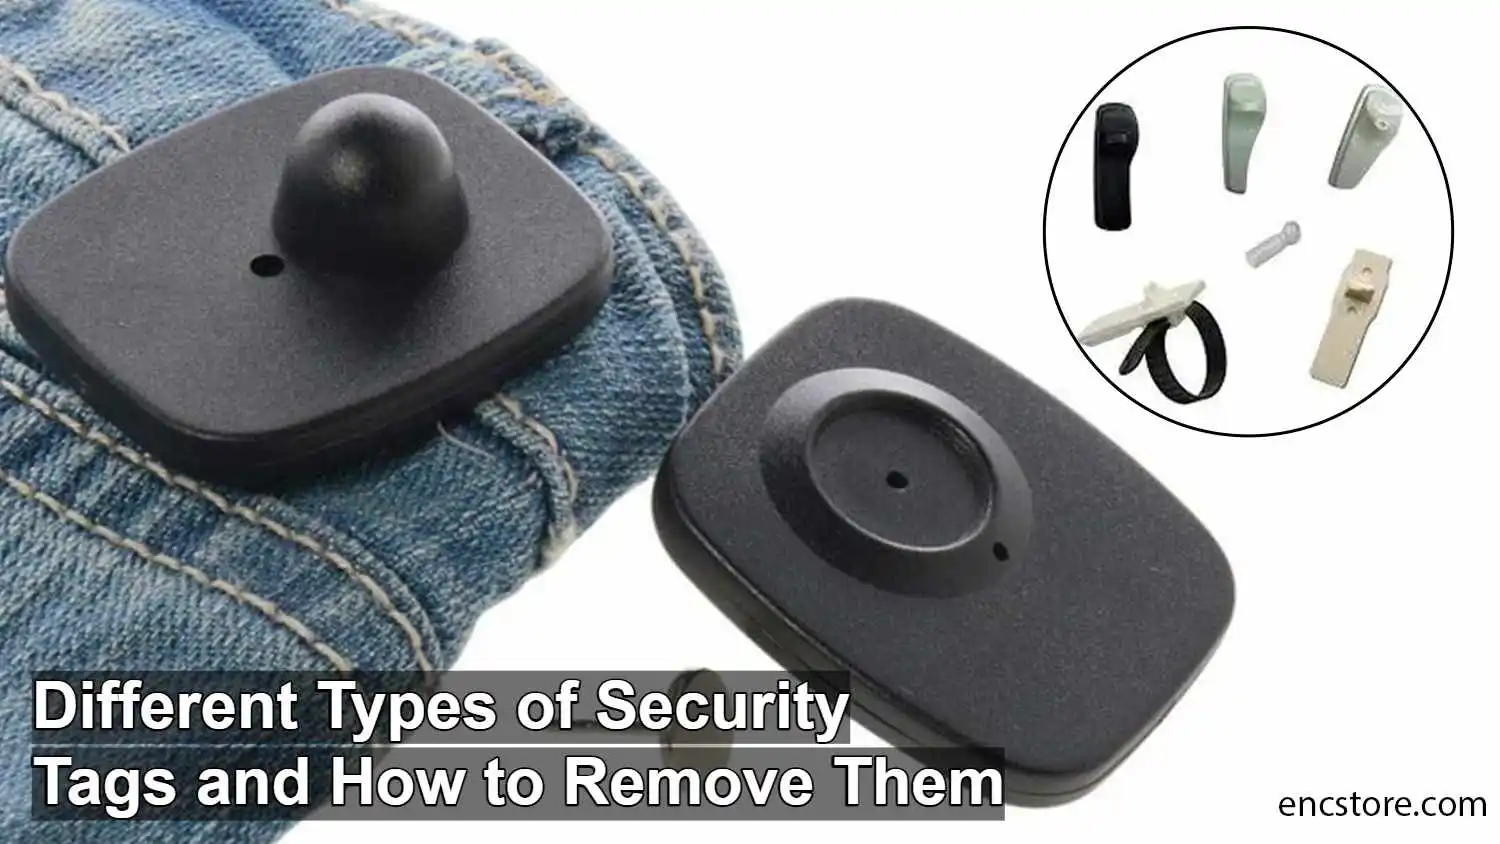 Different Types of Security Tags and How to Remove Them